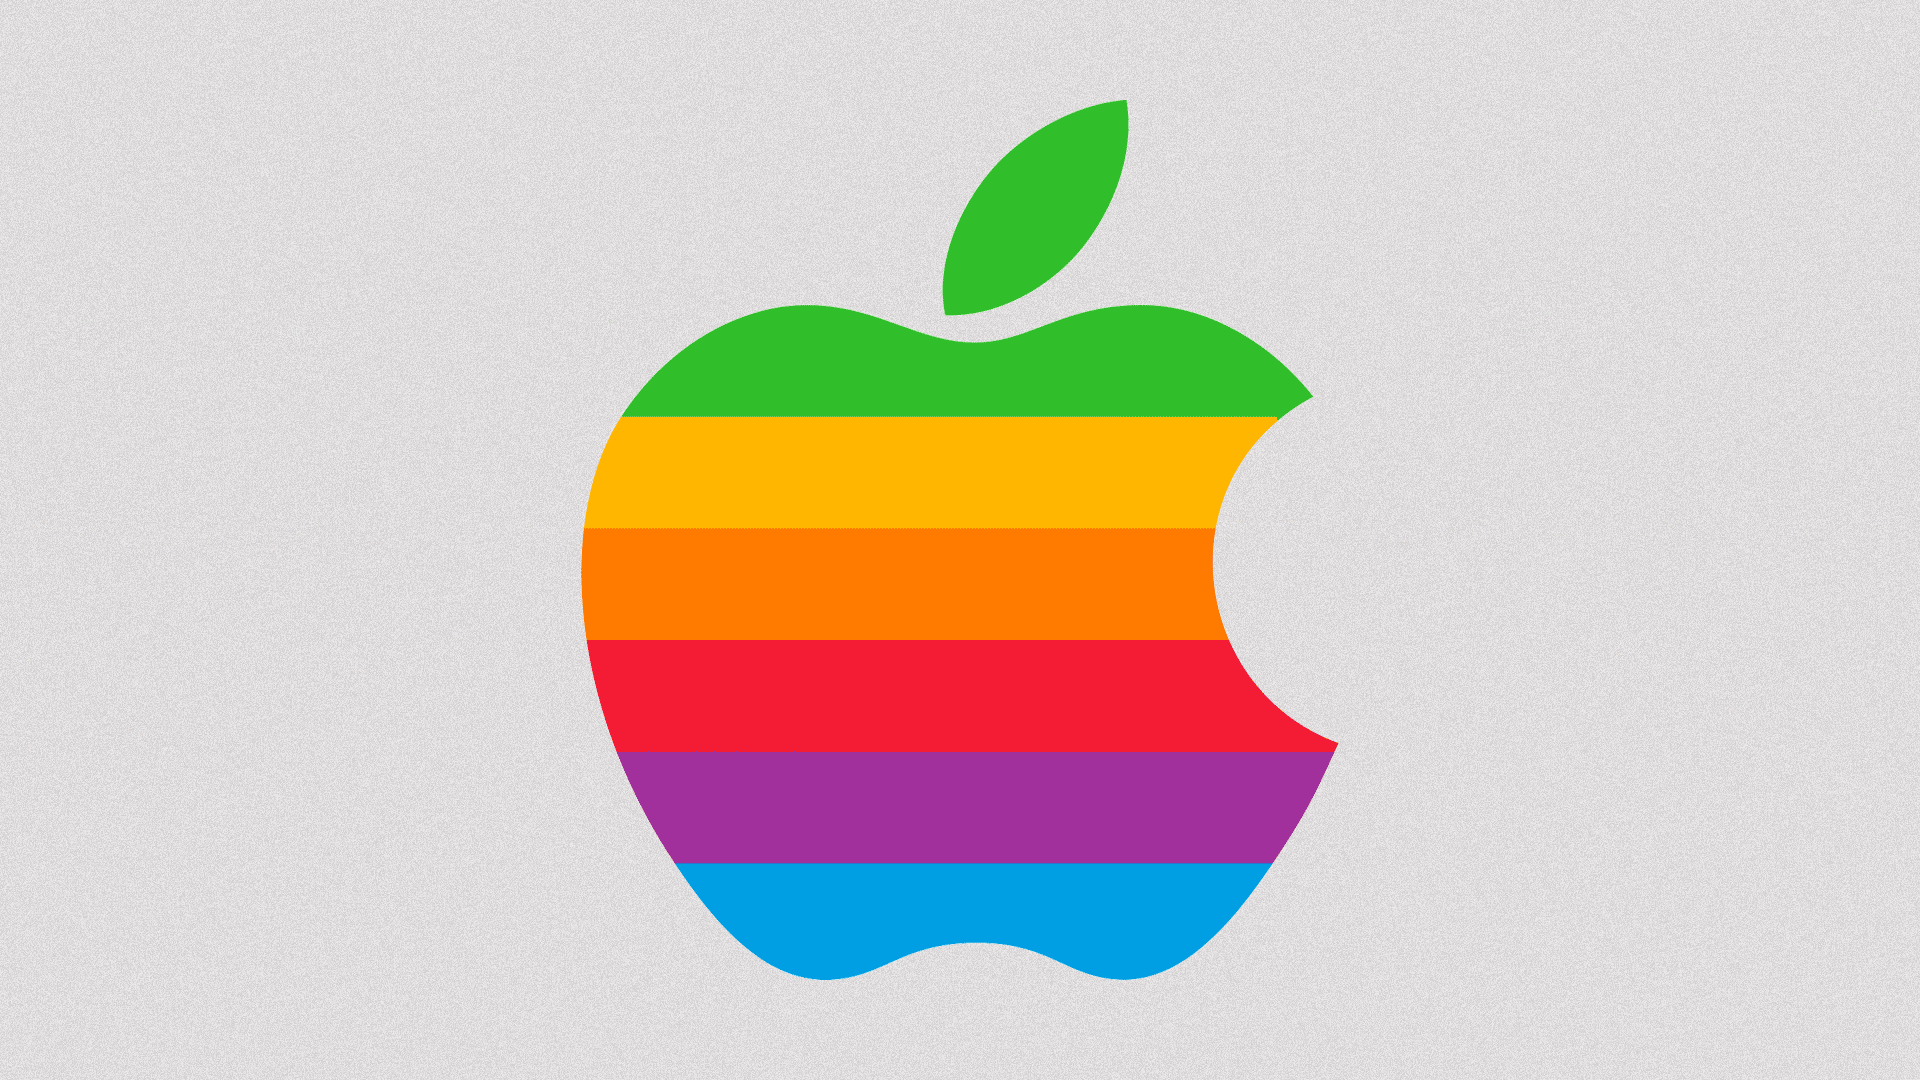 Animated GIF of the Apple logo being eaten